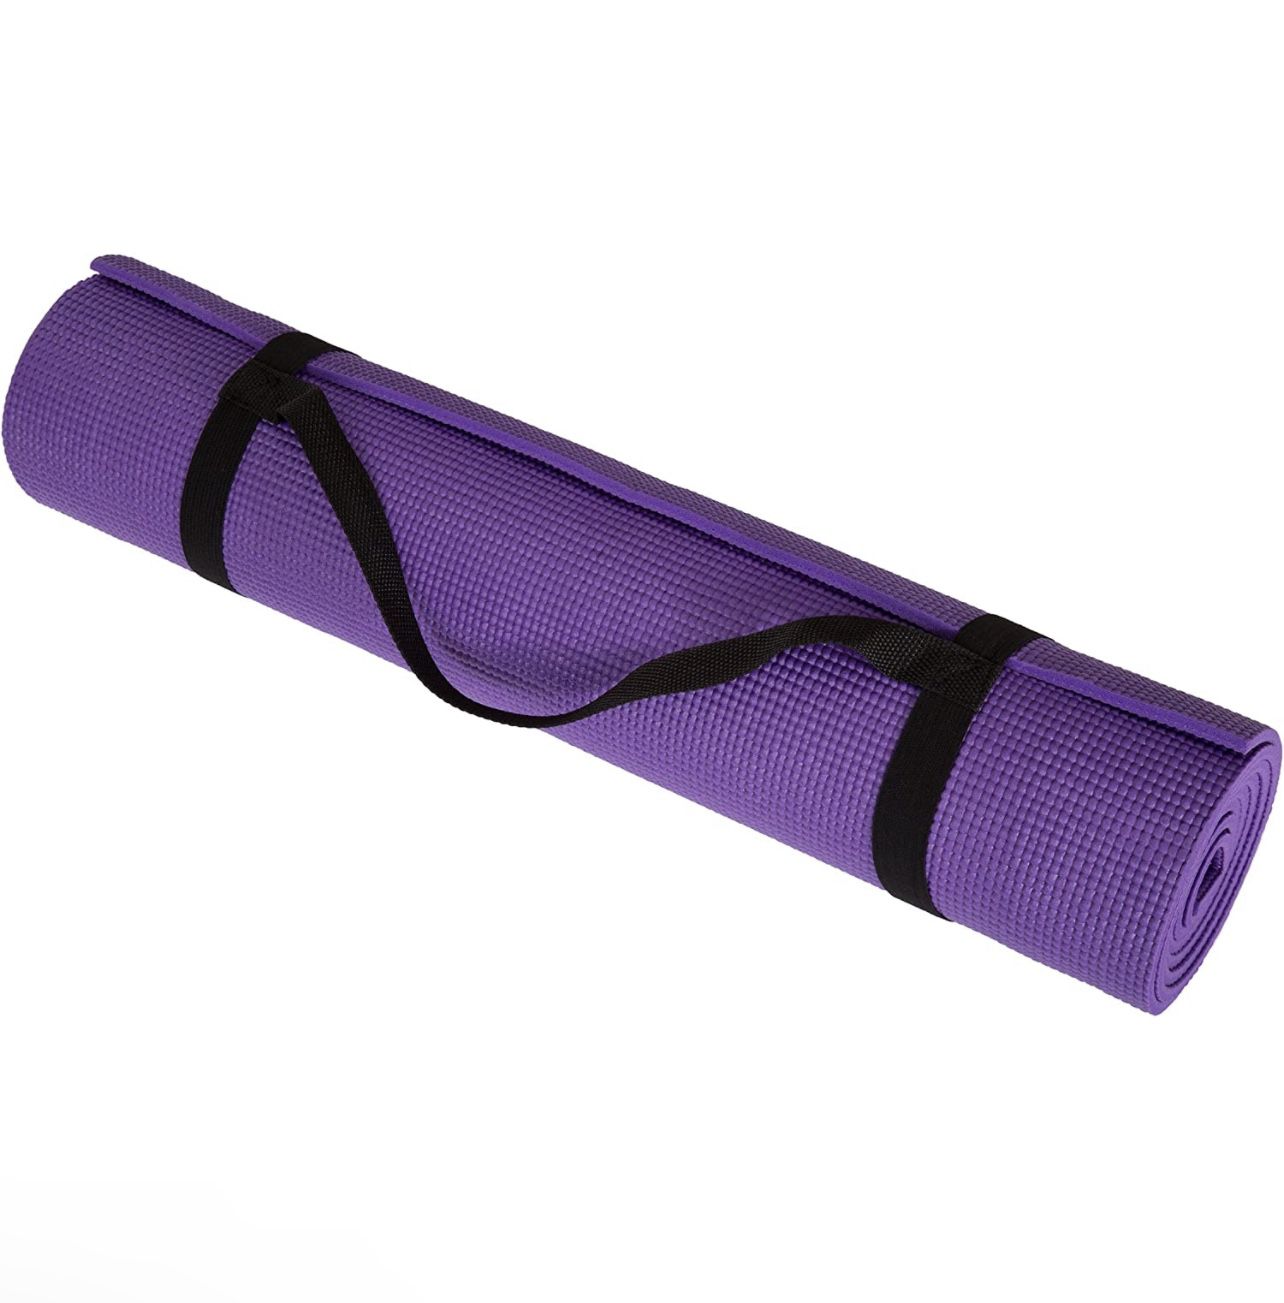 New Non Slip Yoga Mat- Double Sided Comfort Foam, Durable Exercise Mat For Fitness, Pilates and Workout With Carrying Strap By Wakeman Fitness